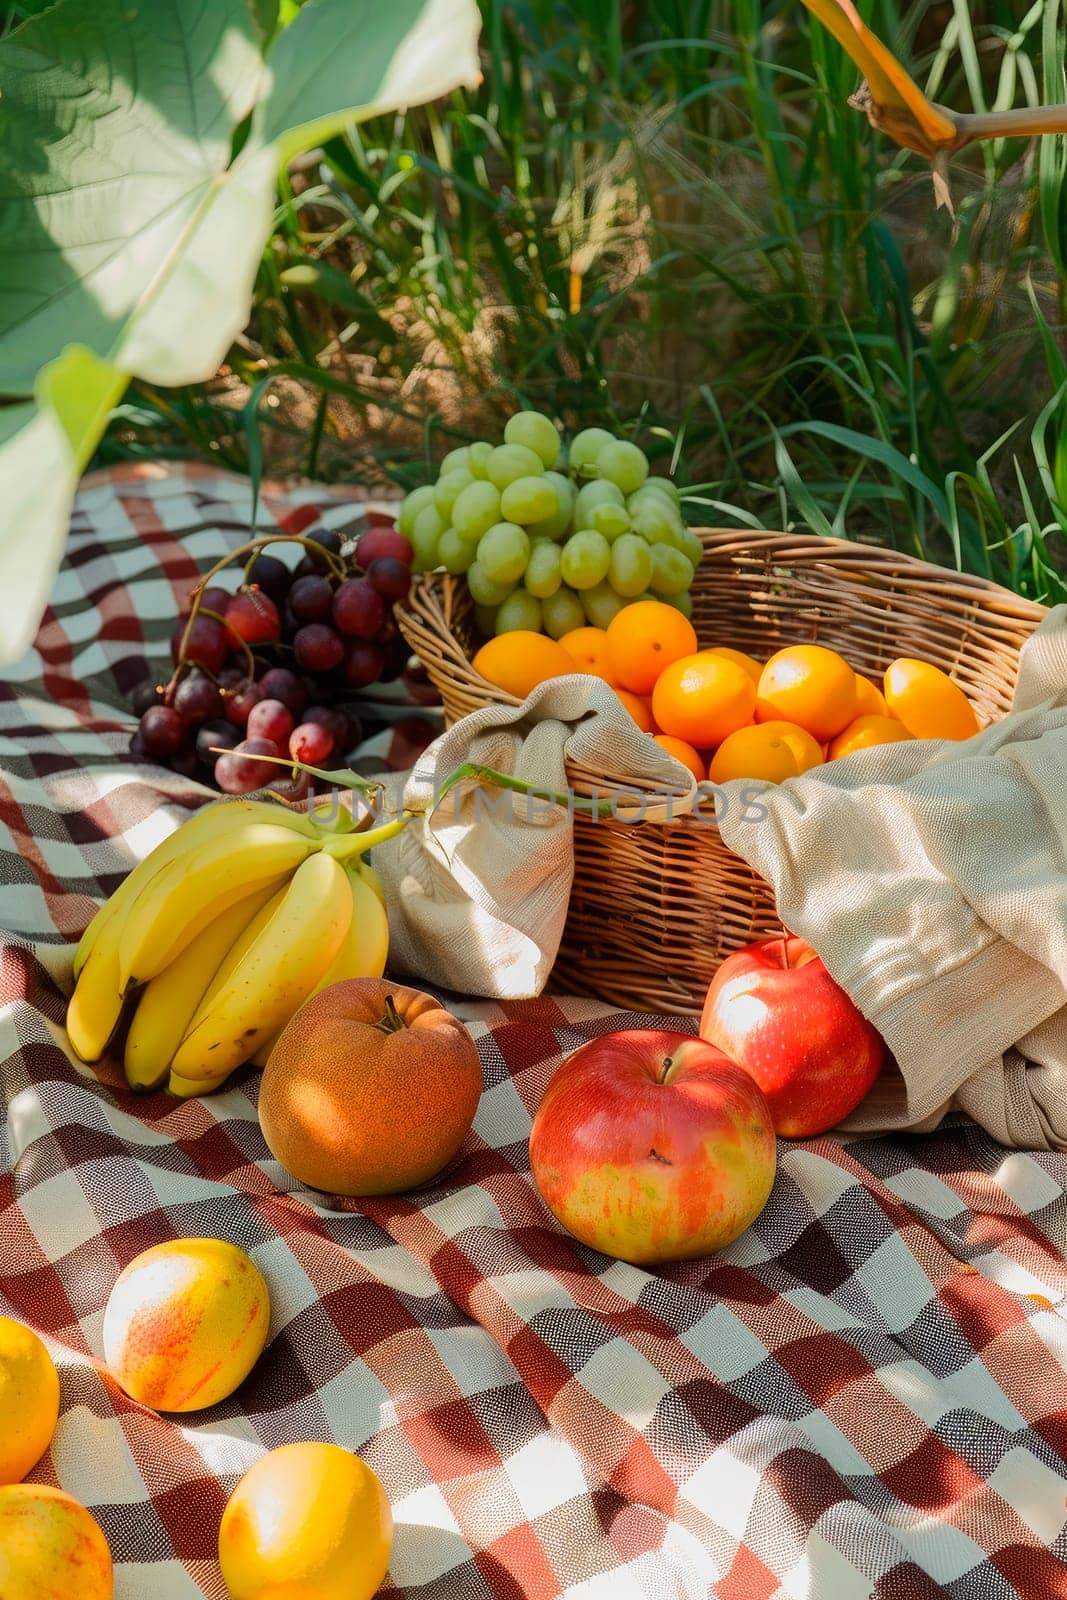 picnic with fruit in the park. selective focus. food.